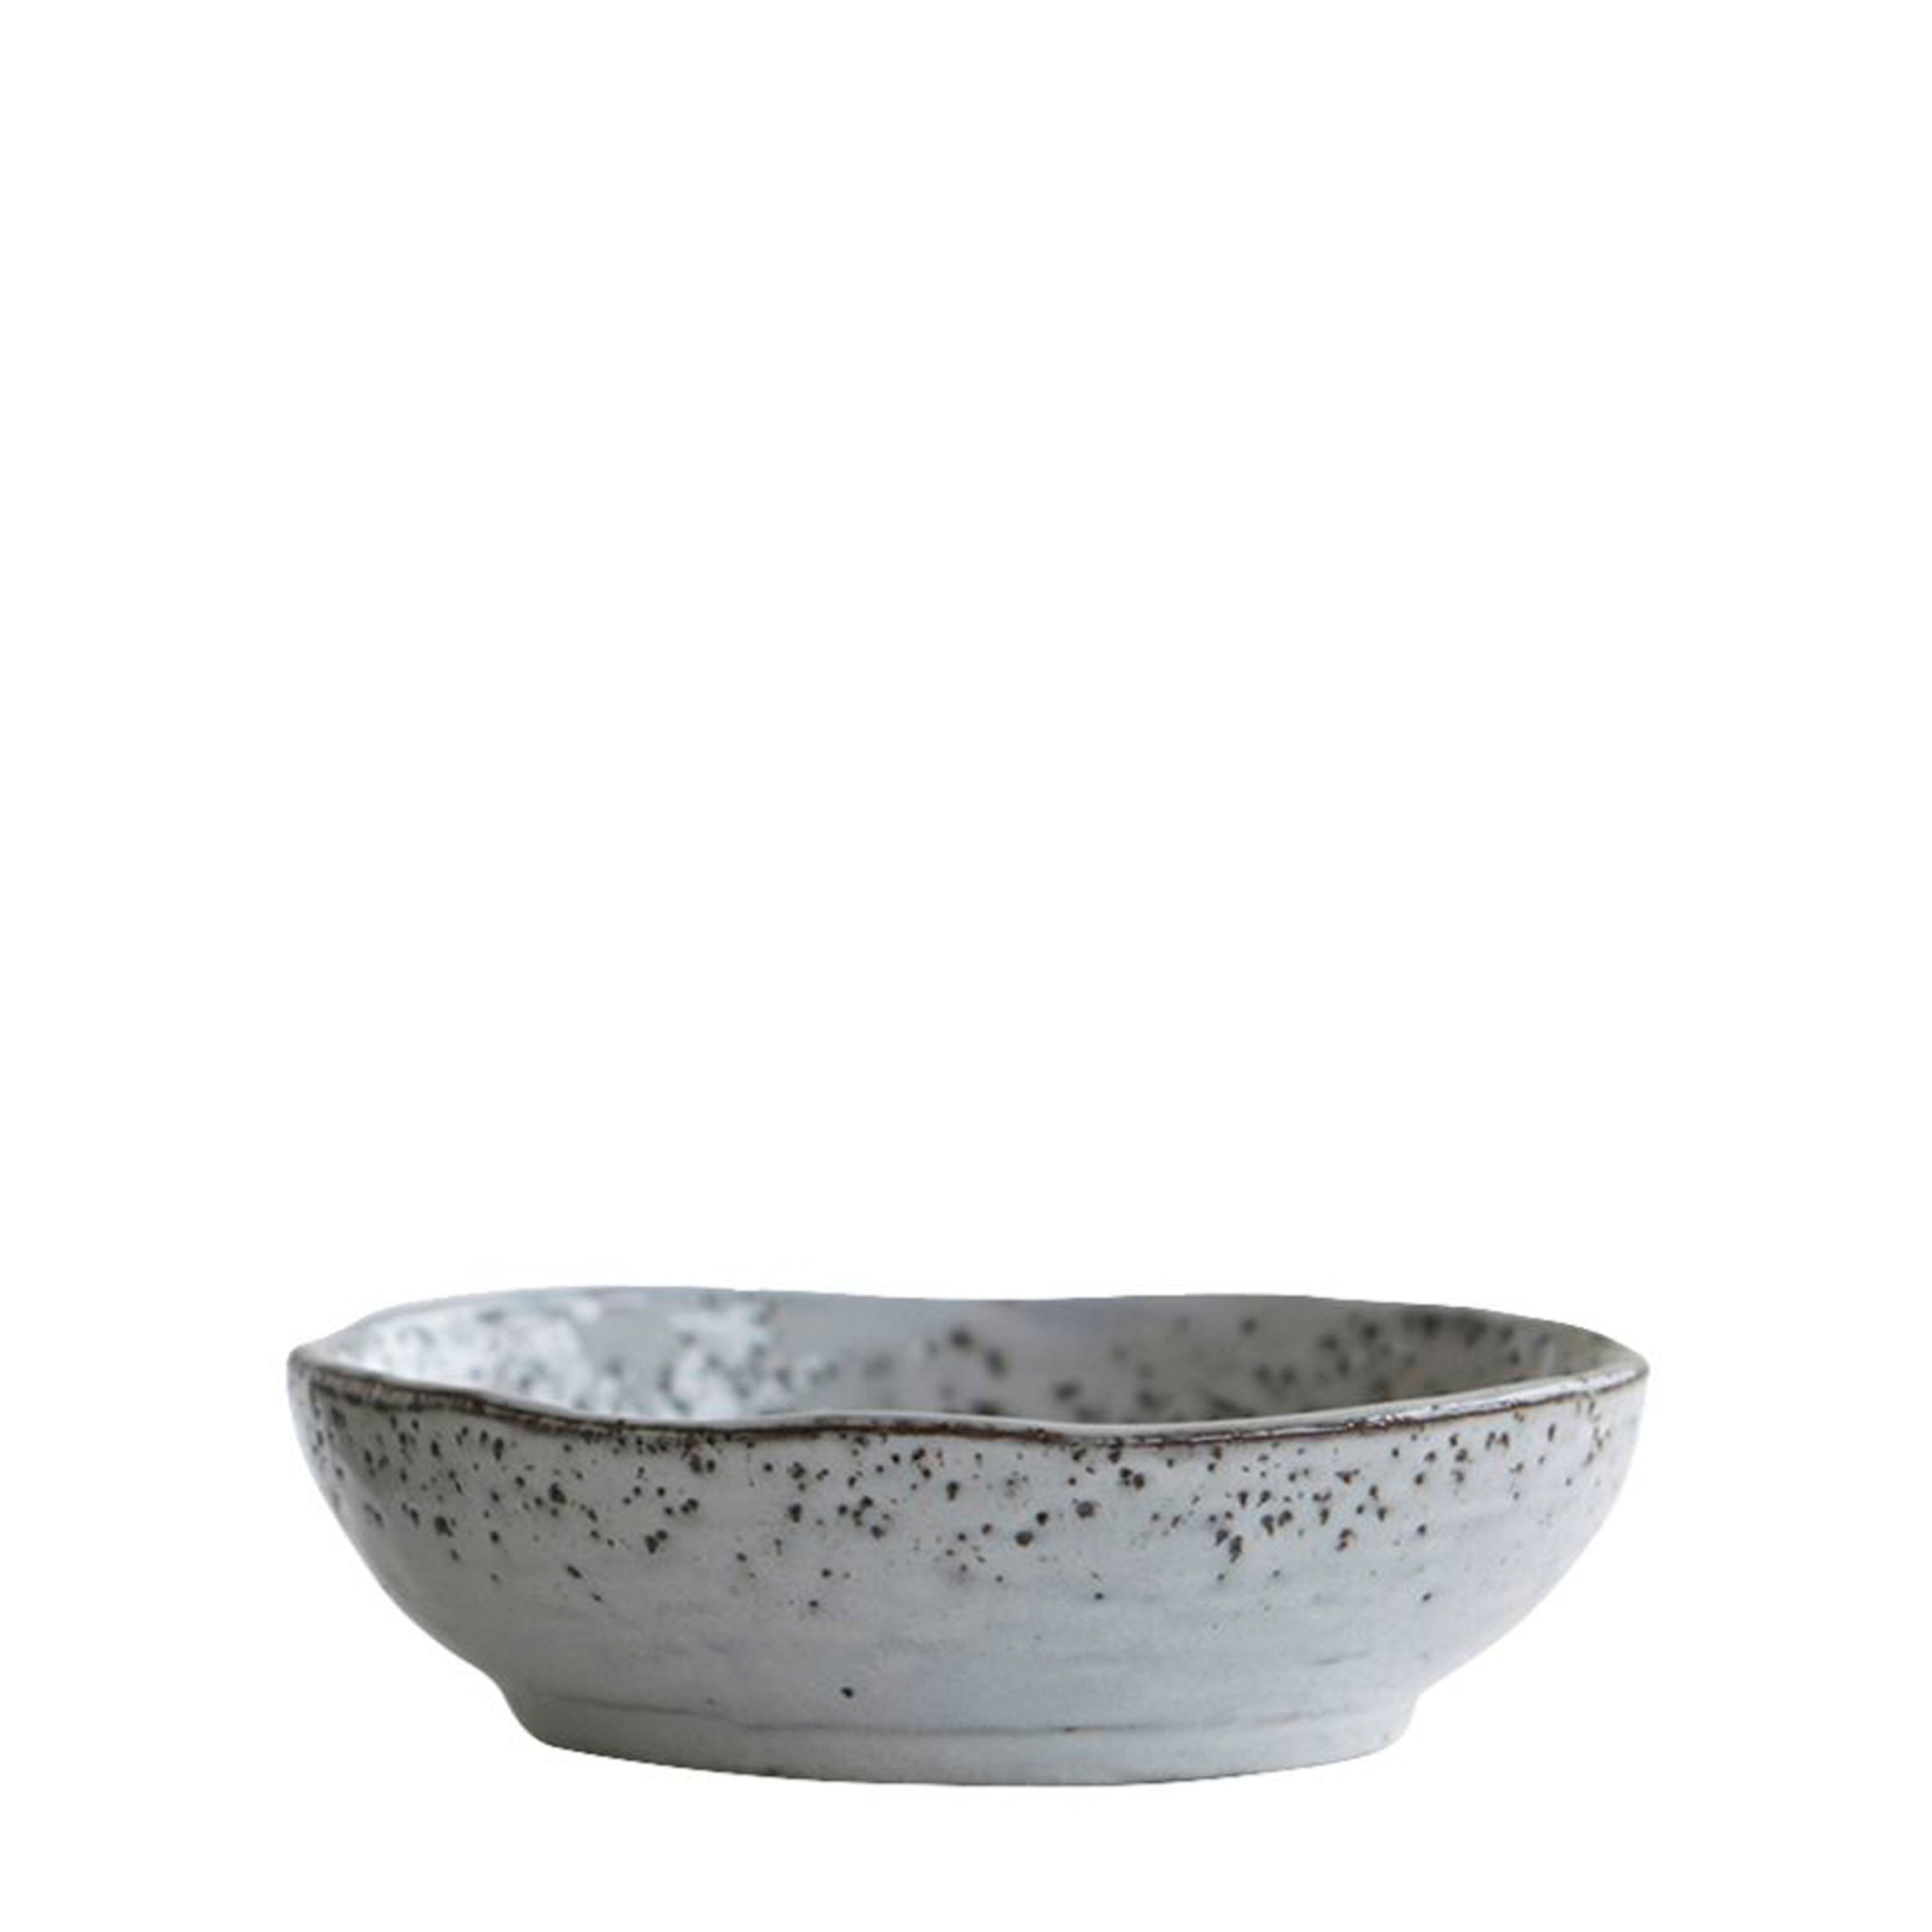 'OCEAN' SMALL RUSTIC SPECKLED BOWL